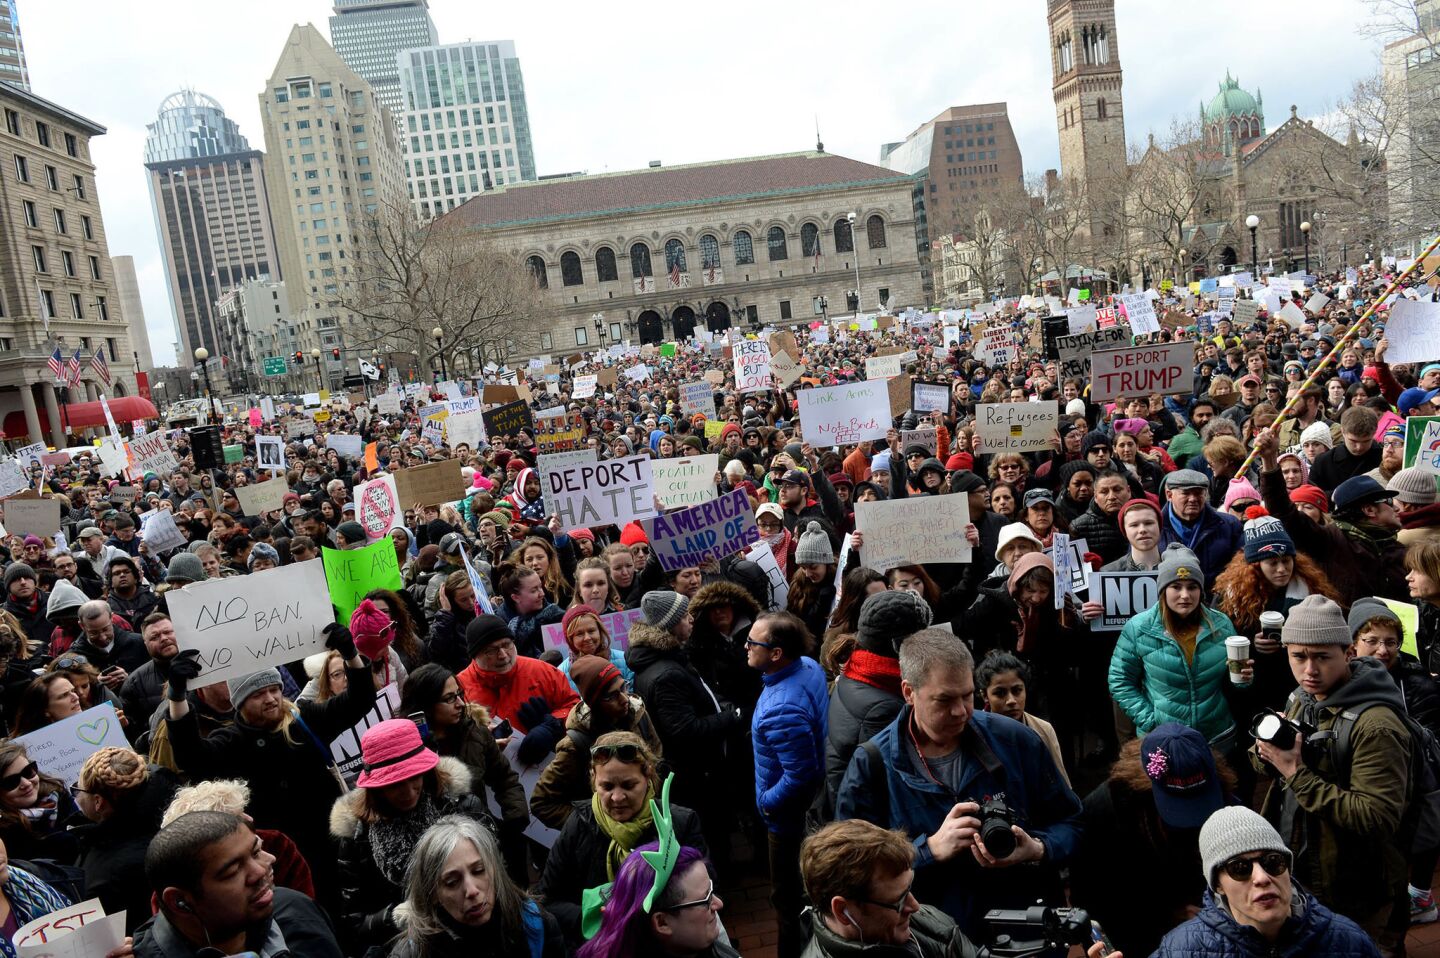 People gather in Boston's Copley Square to protest the travel ban enacted by President Trump.